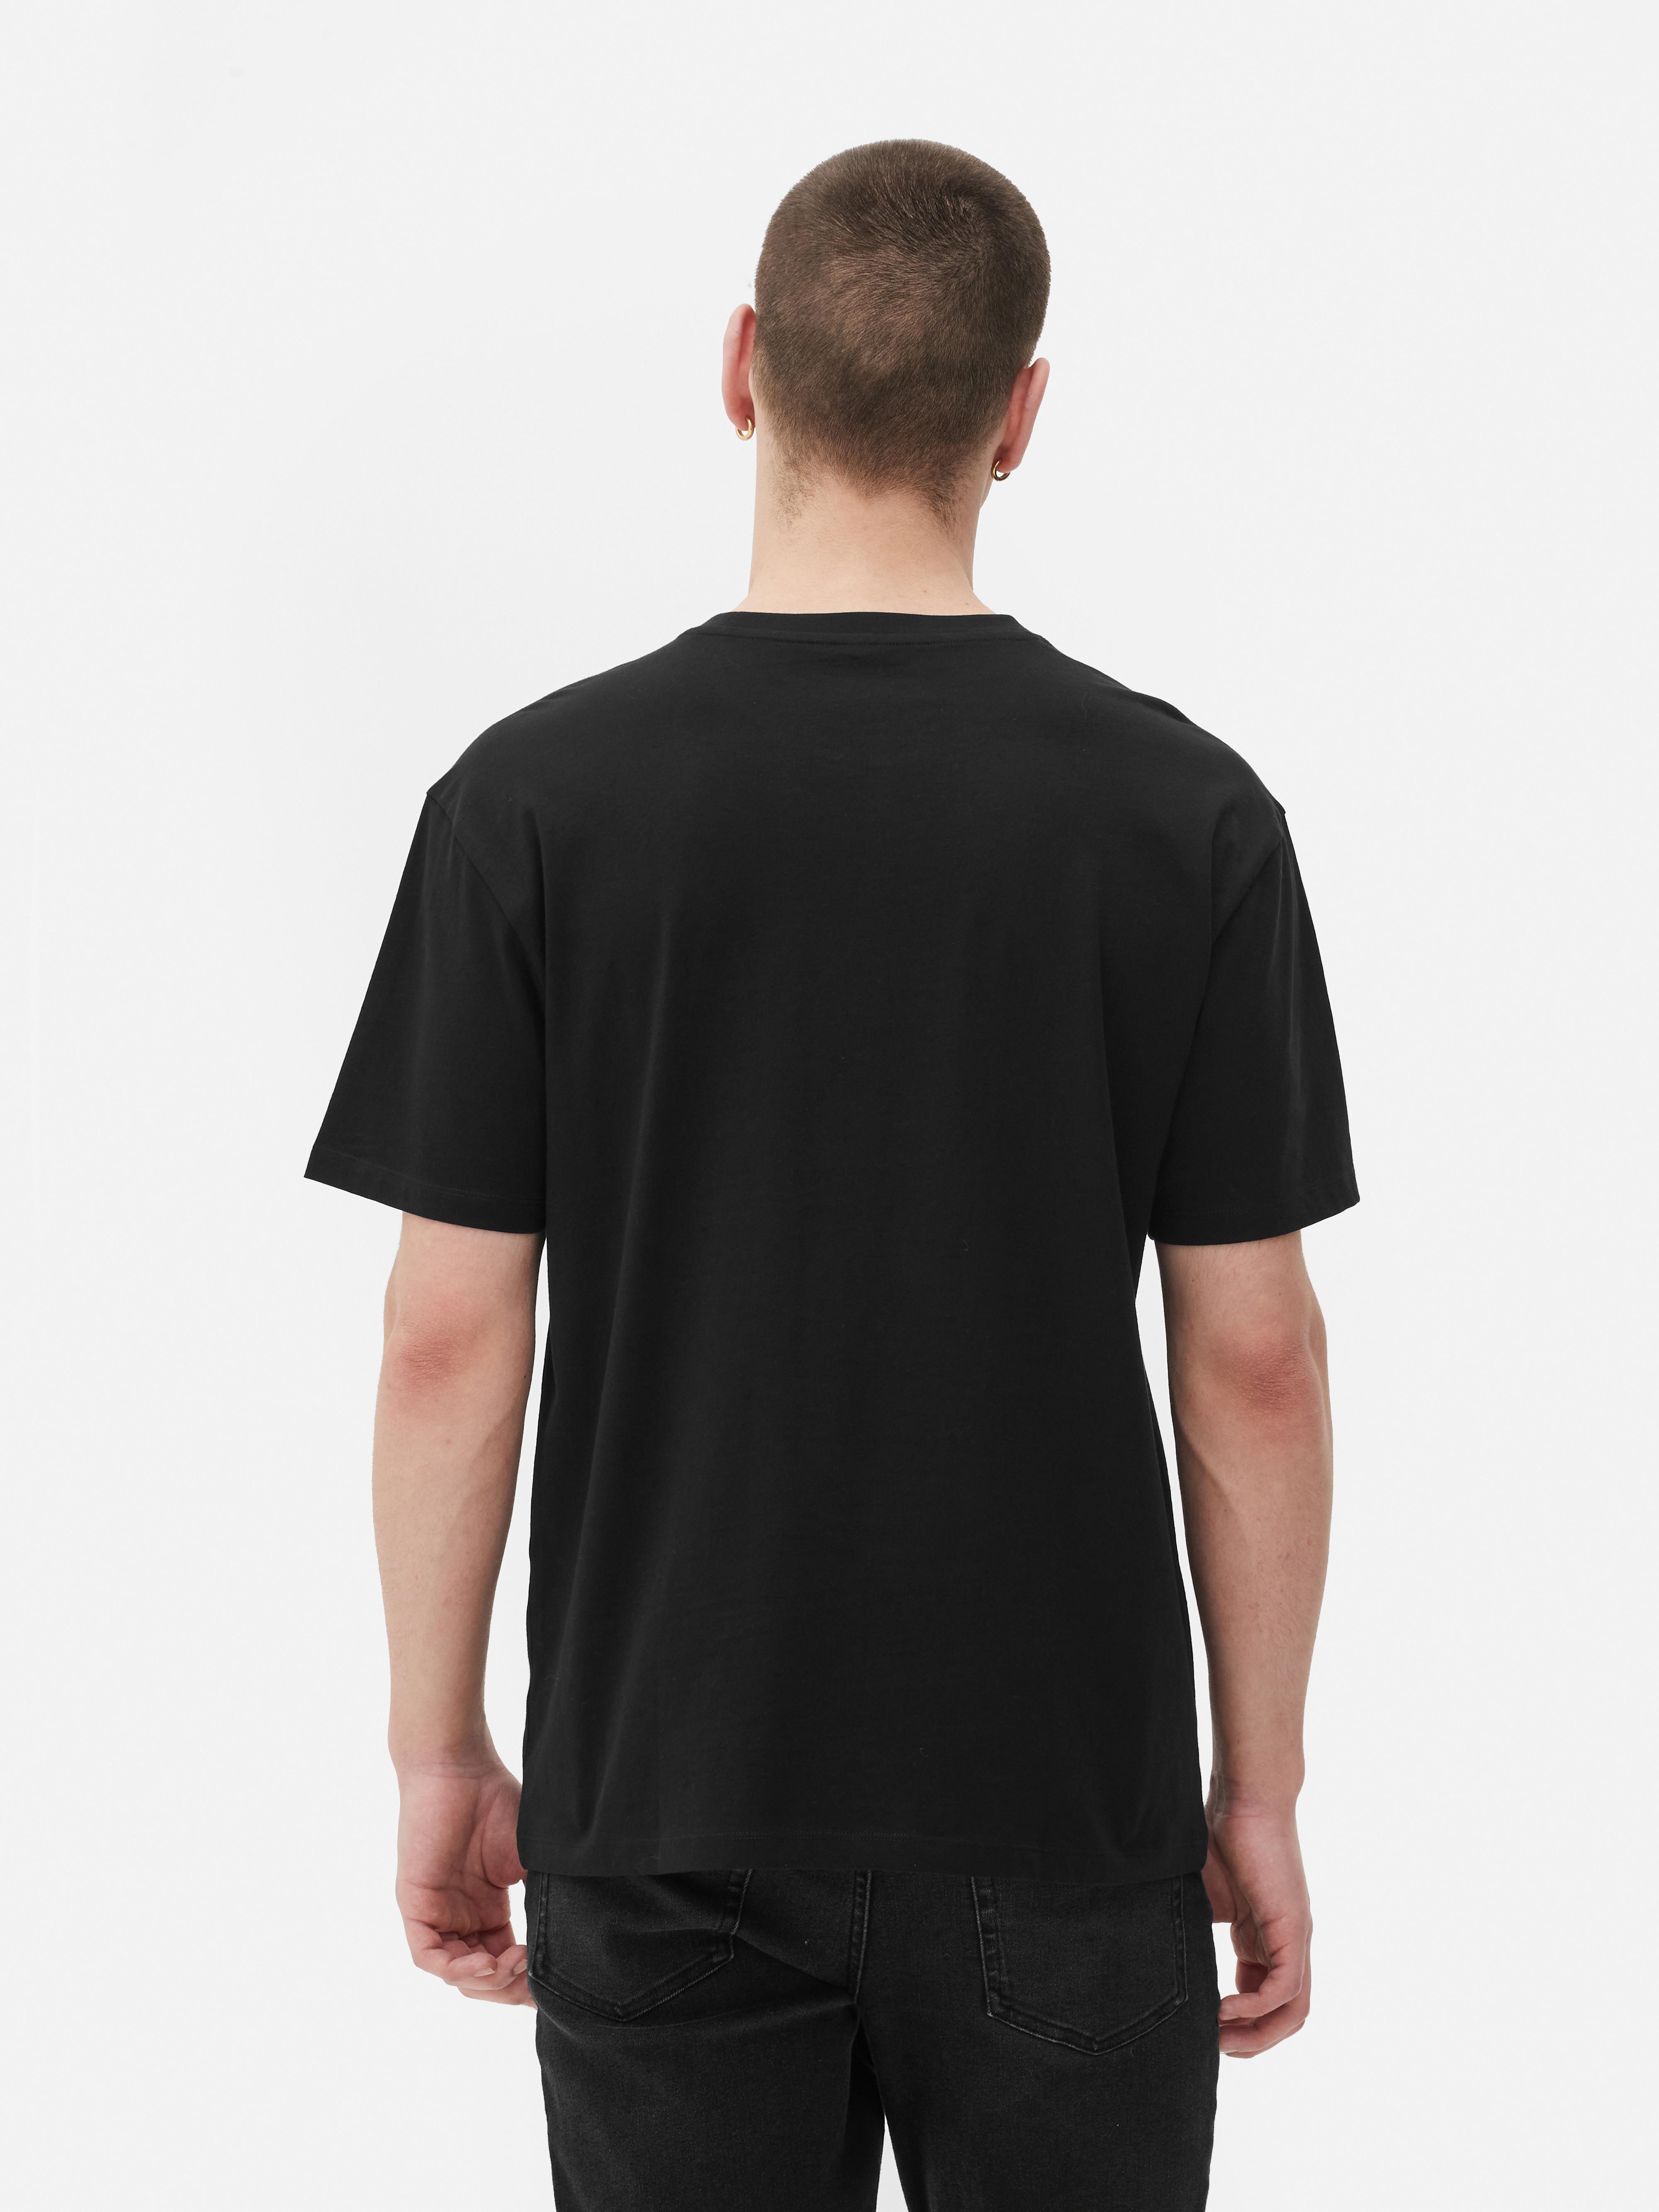 Mens Black Relaxed Fit T-shirt | Primark